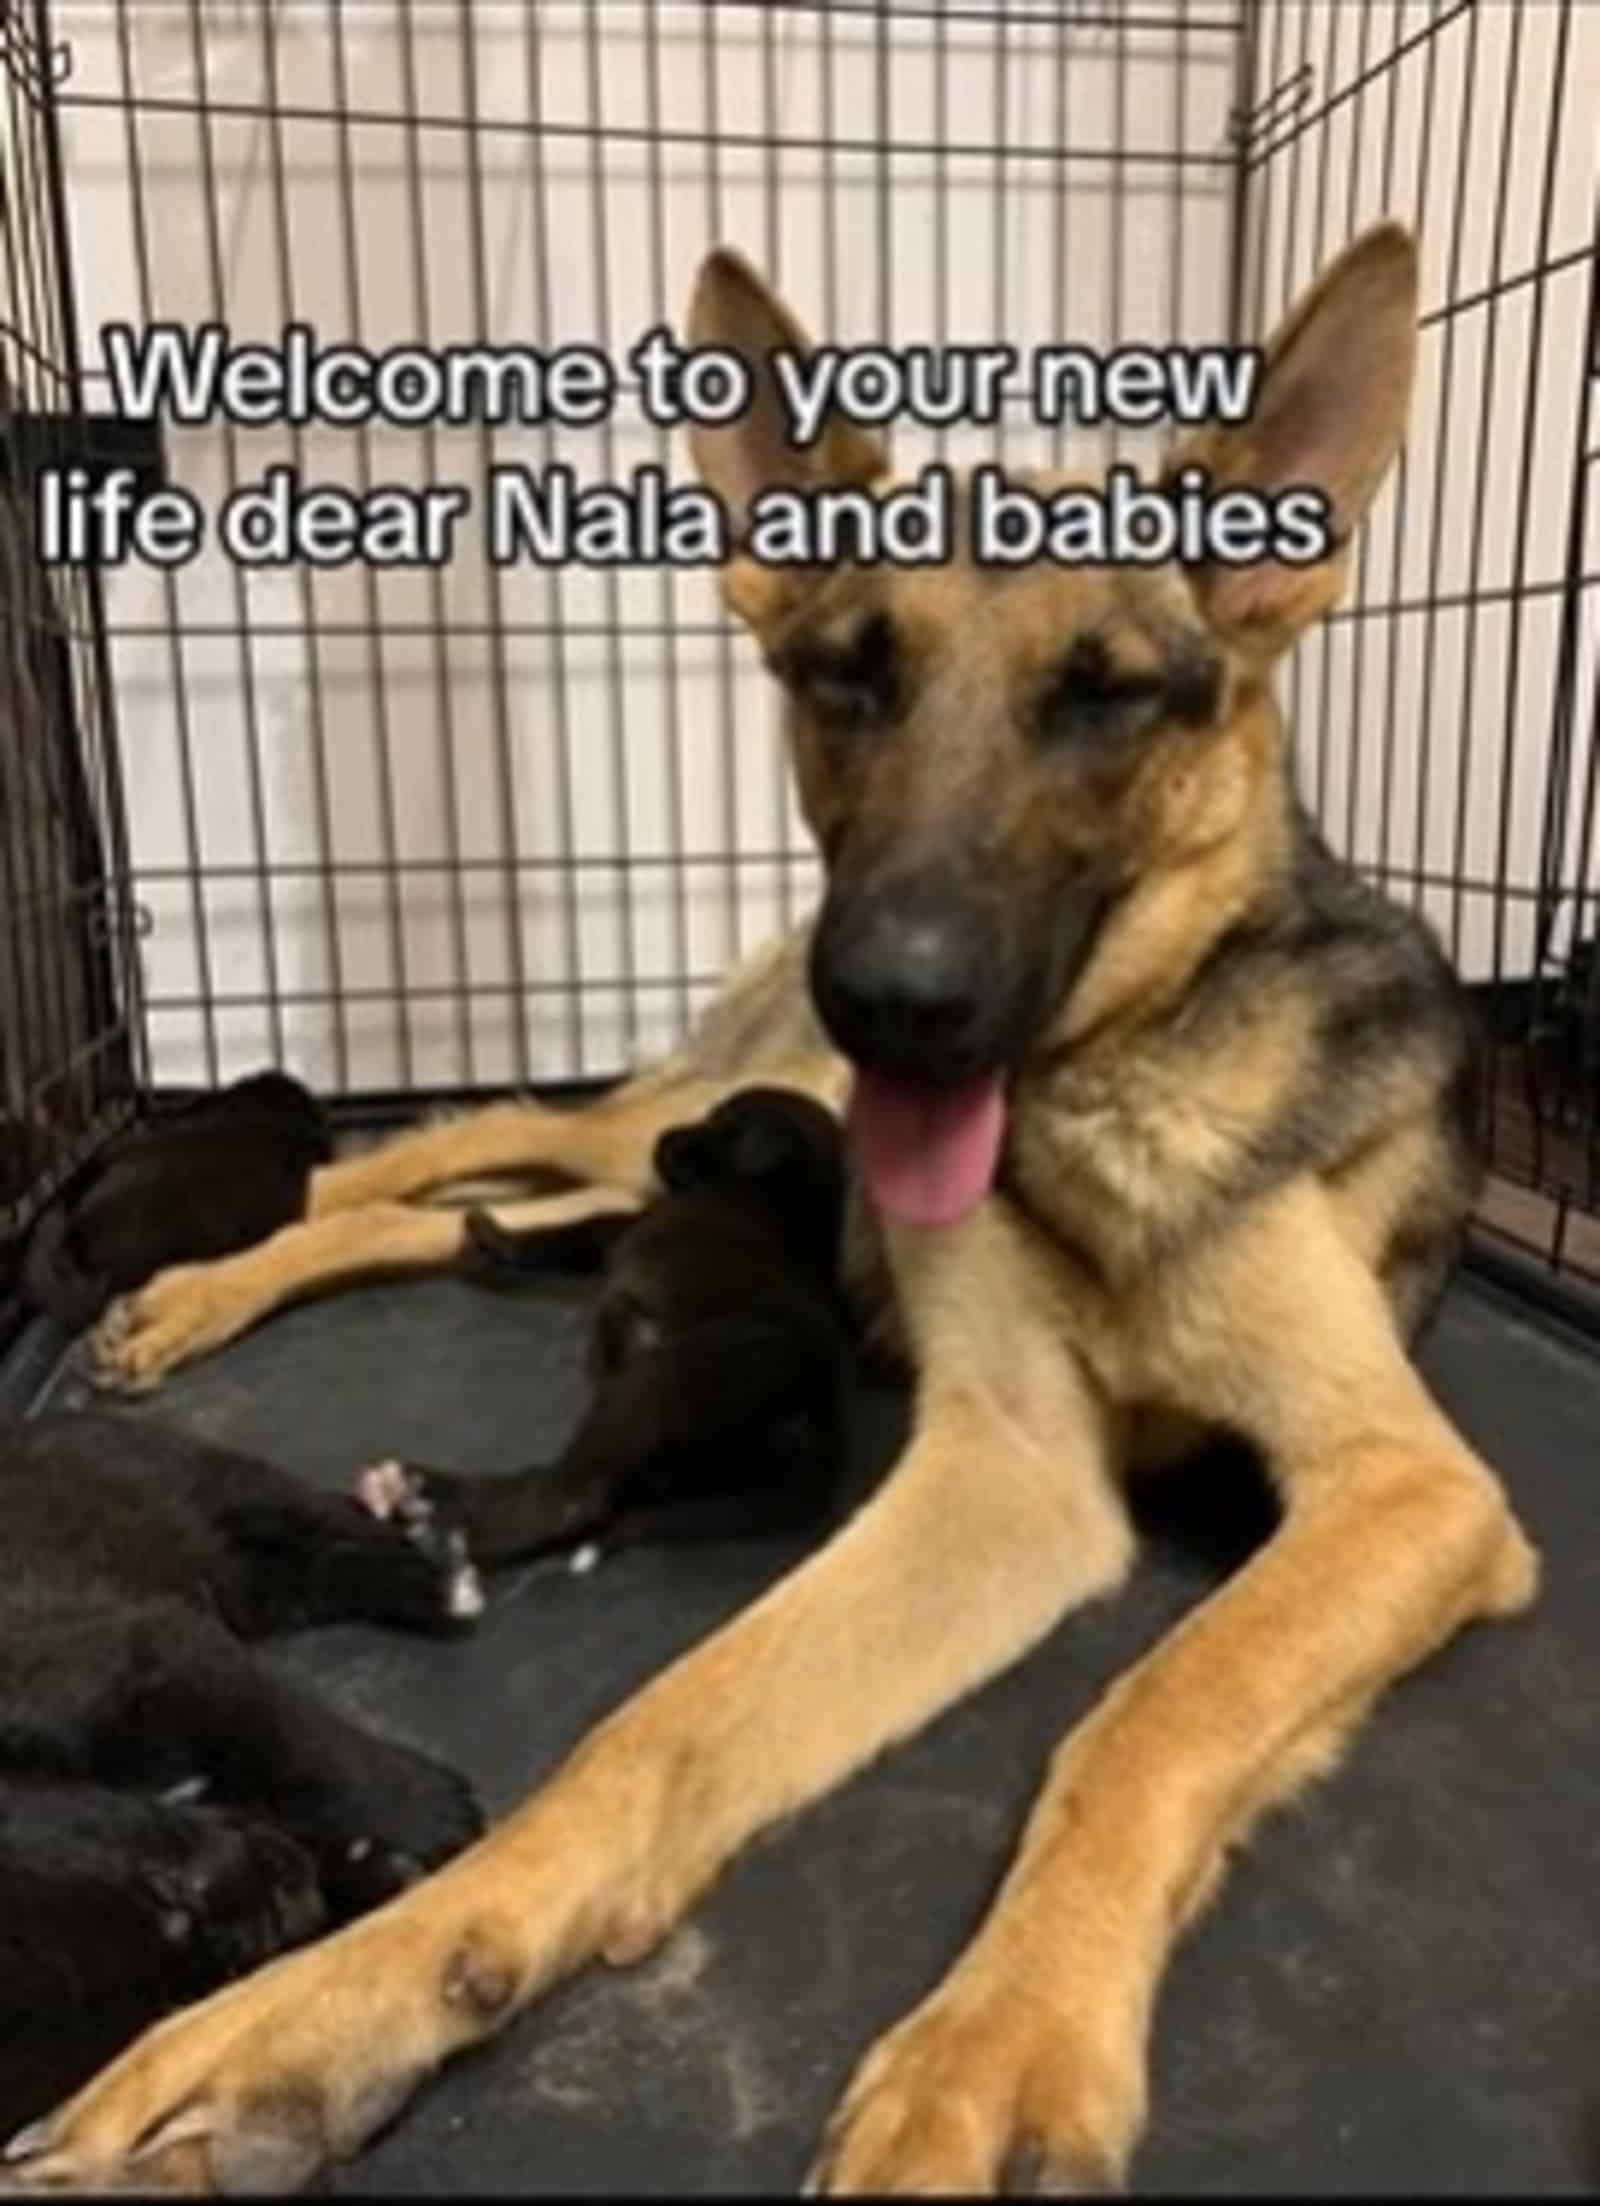 german shepherd dog and her puppies in a crate